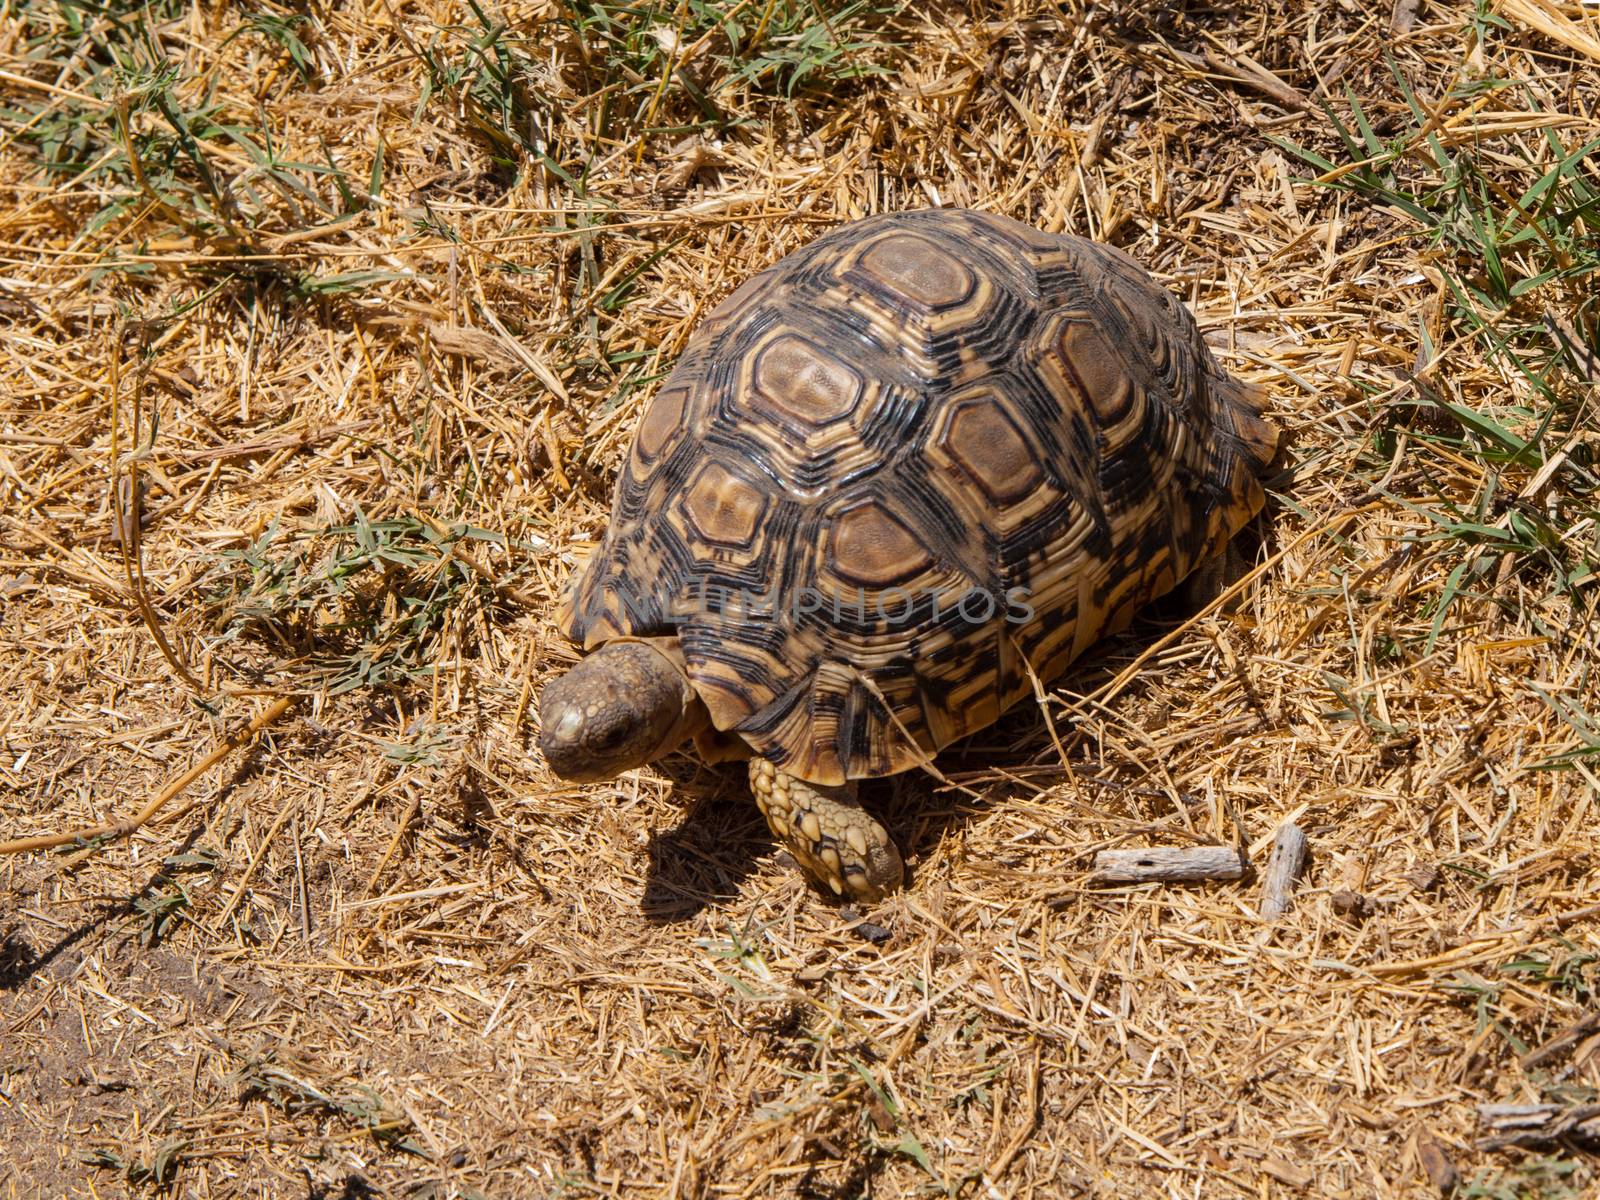 African turtle in the dry grassland